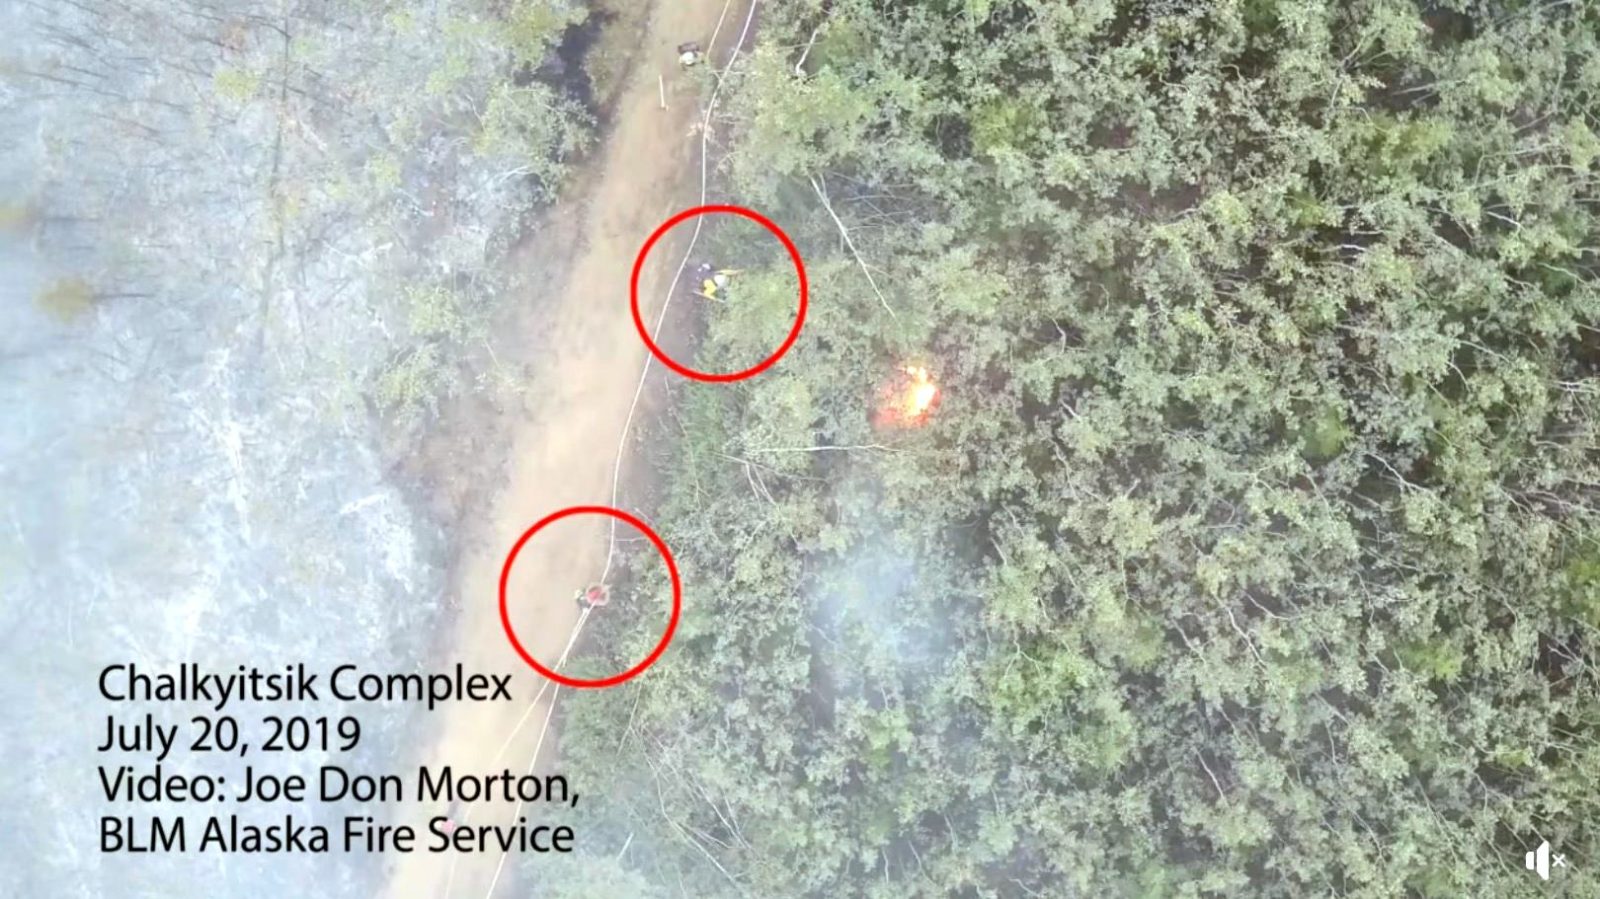 Drone helps ground crews put out spot fire in Chalkyitsik Complex